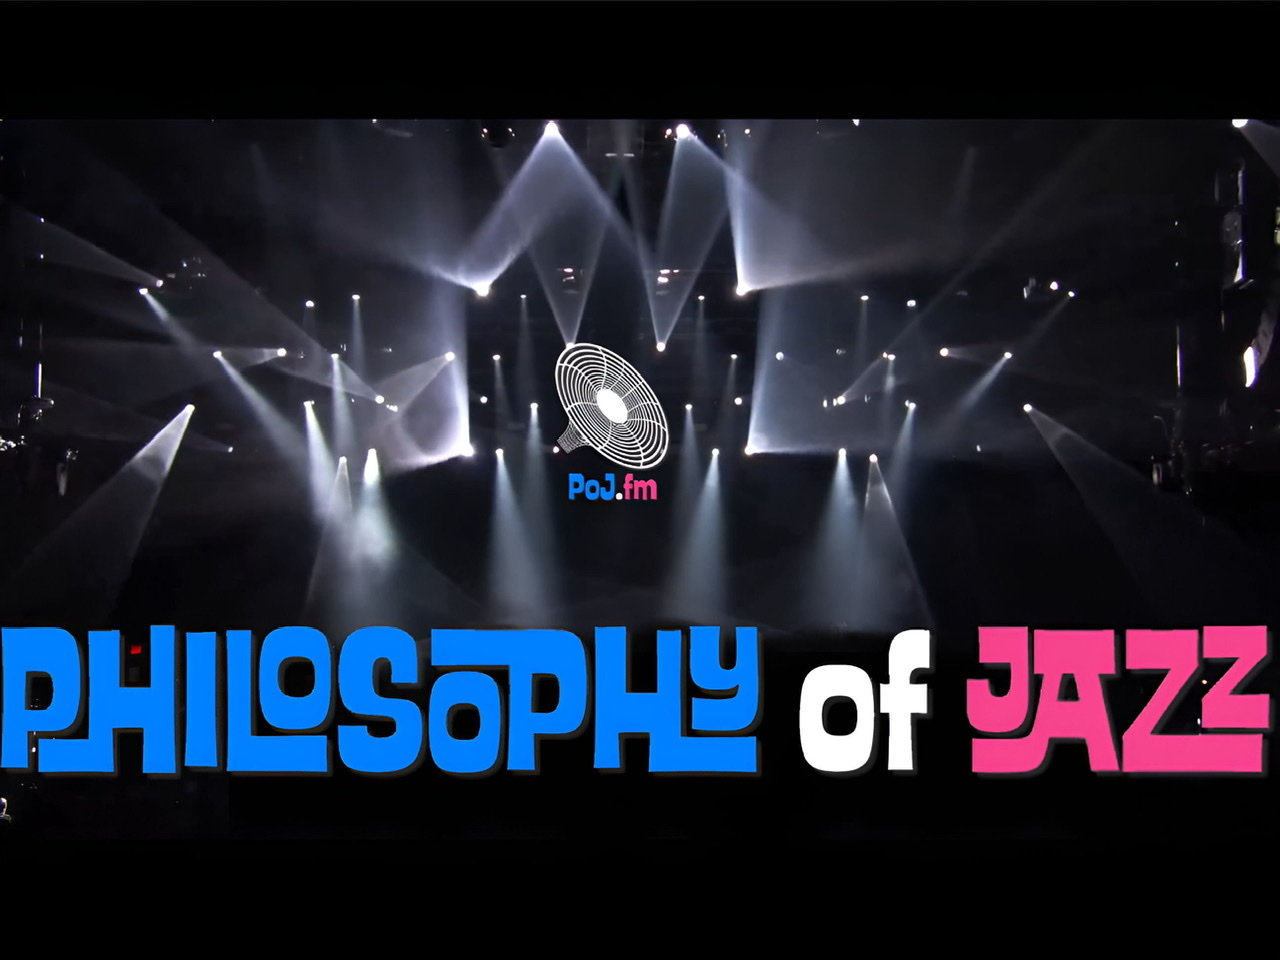 An unframed black background with numerous white spot lights projecting through it in all directions with a large PoJ.fm logo at center and large words "Philosophy of Jazz" in blue, white, and pink at center bottom.